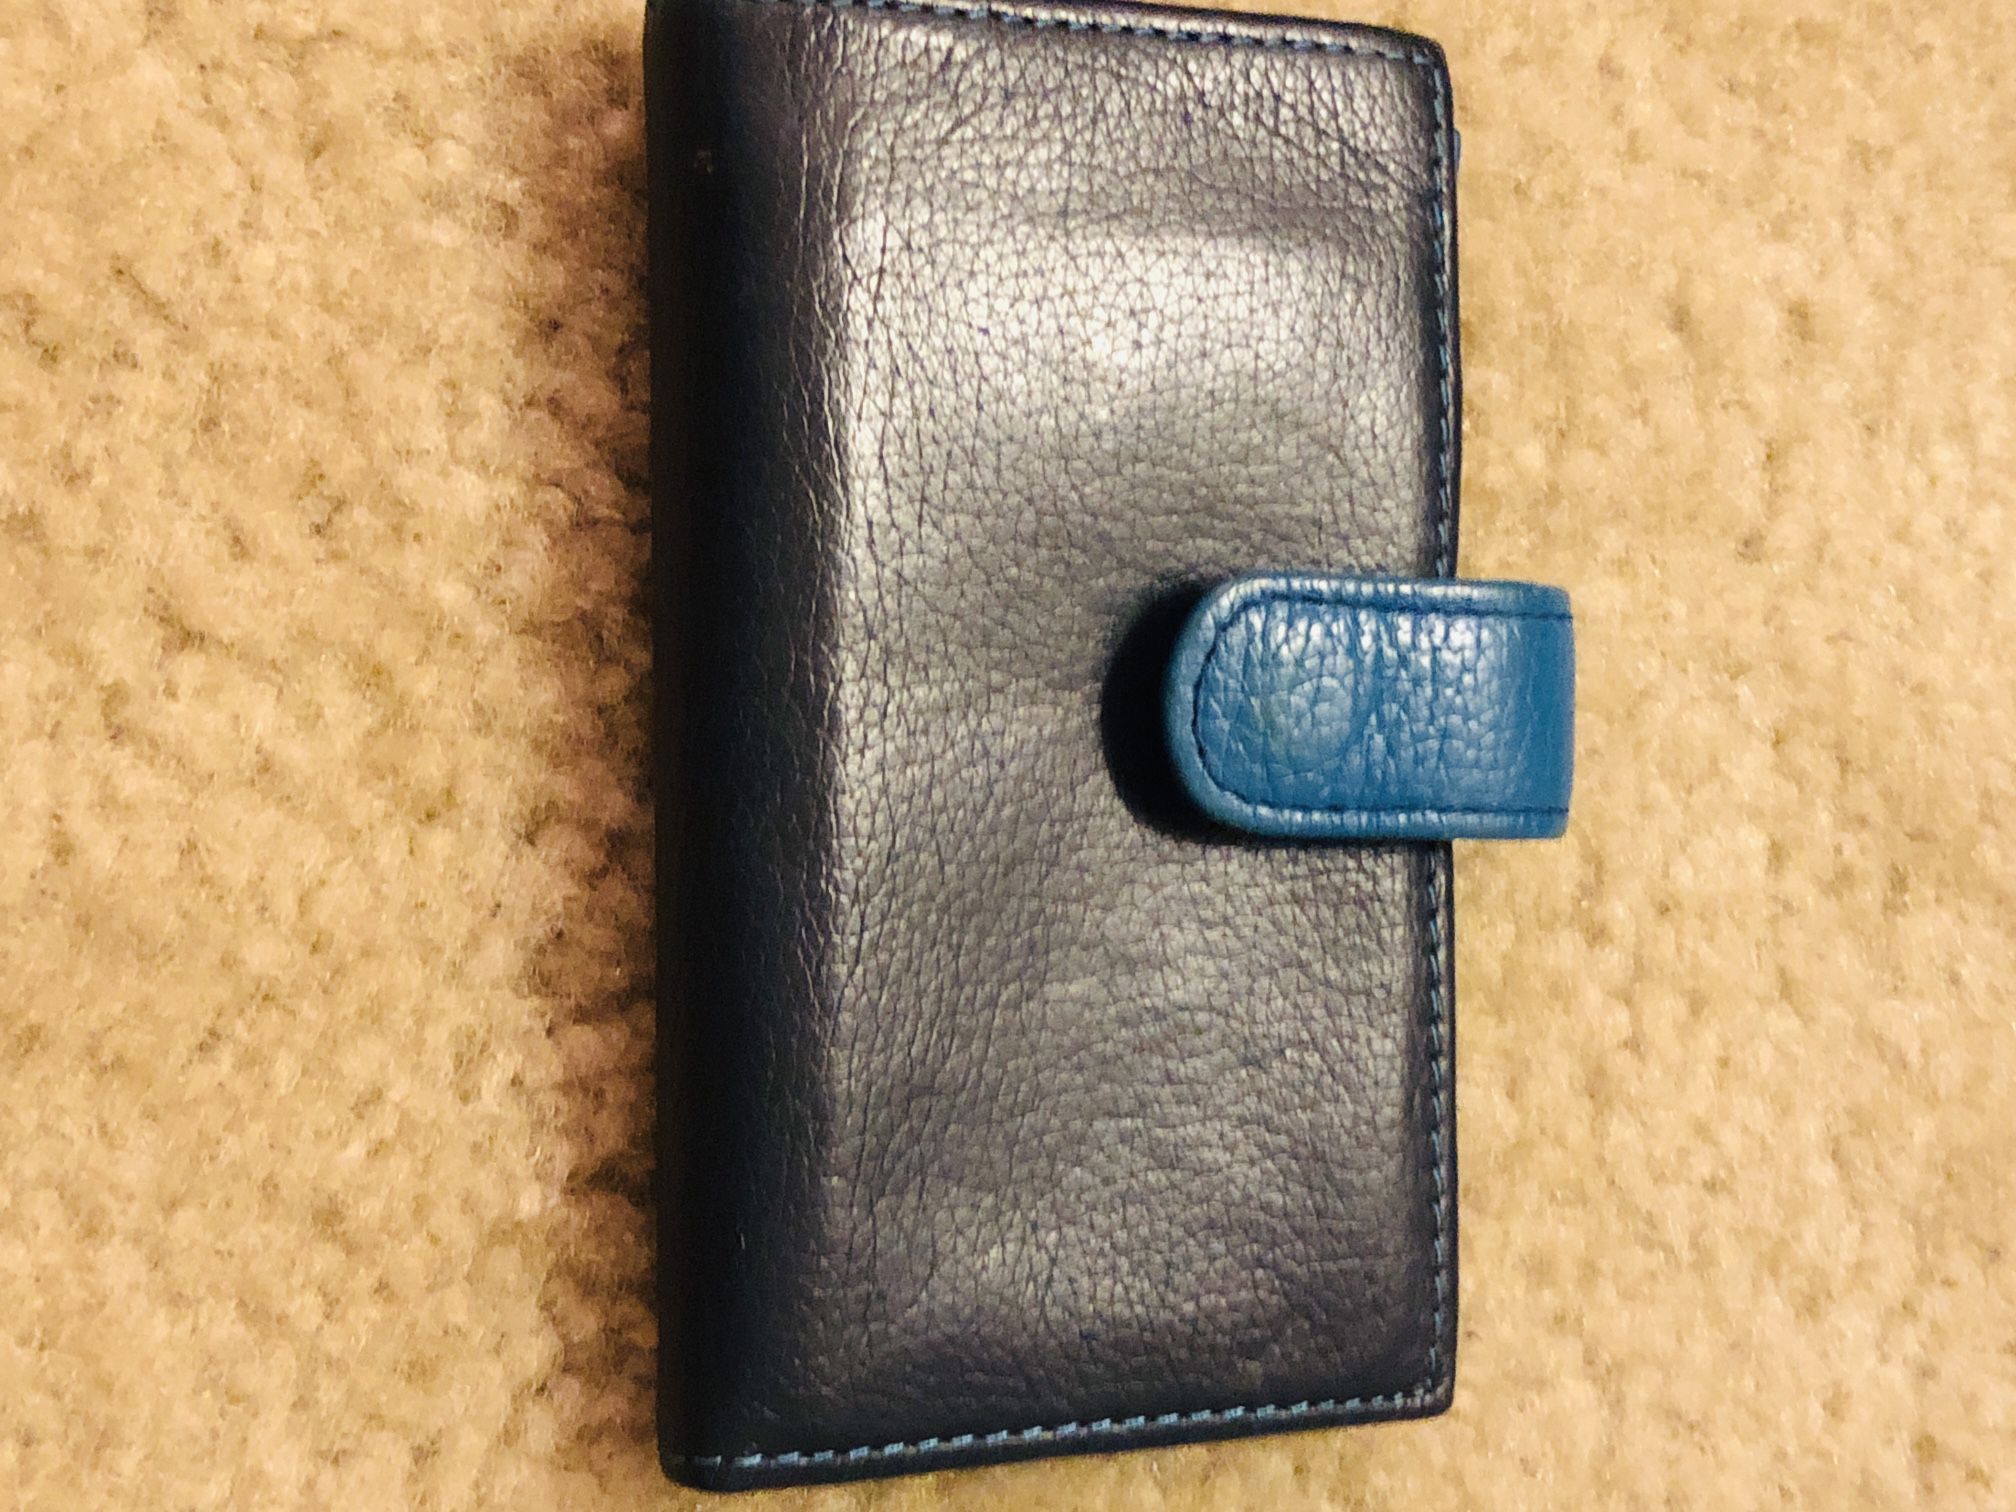 Small Unisex I’d Wallet Genuine Leather 